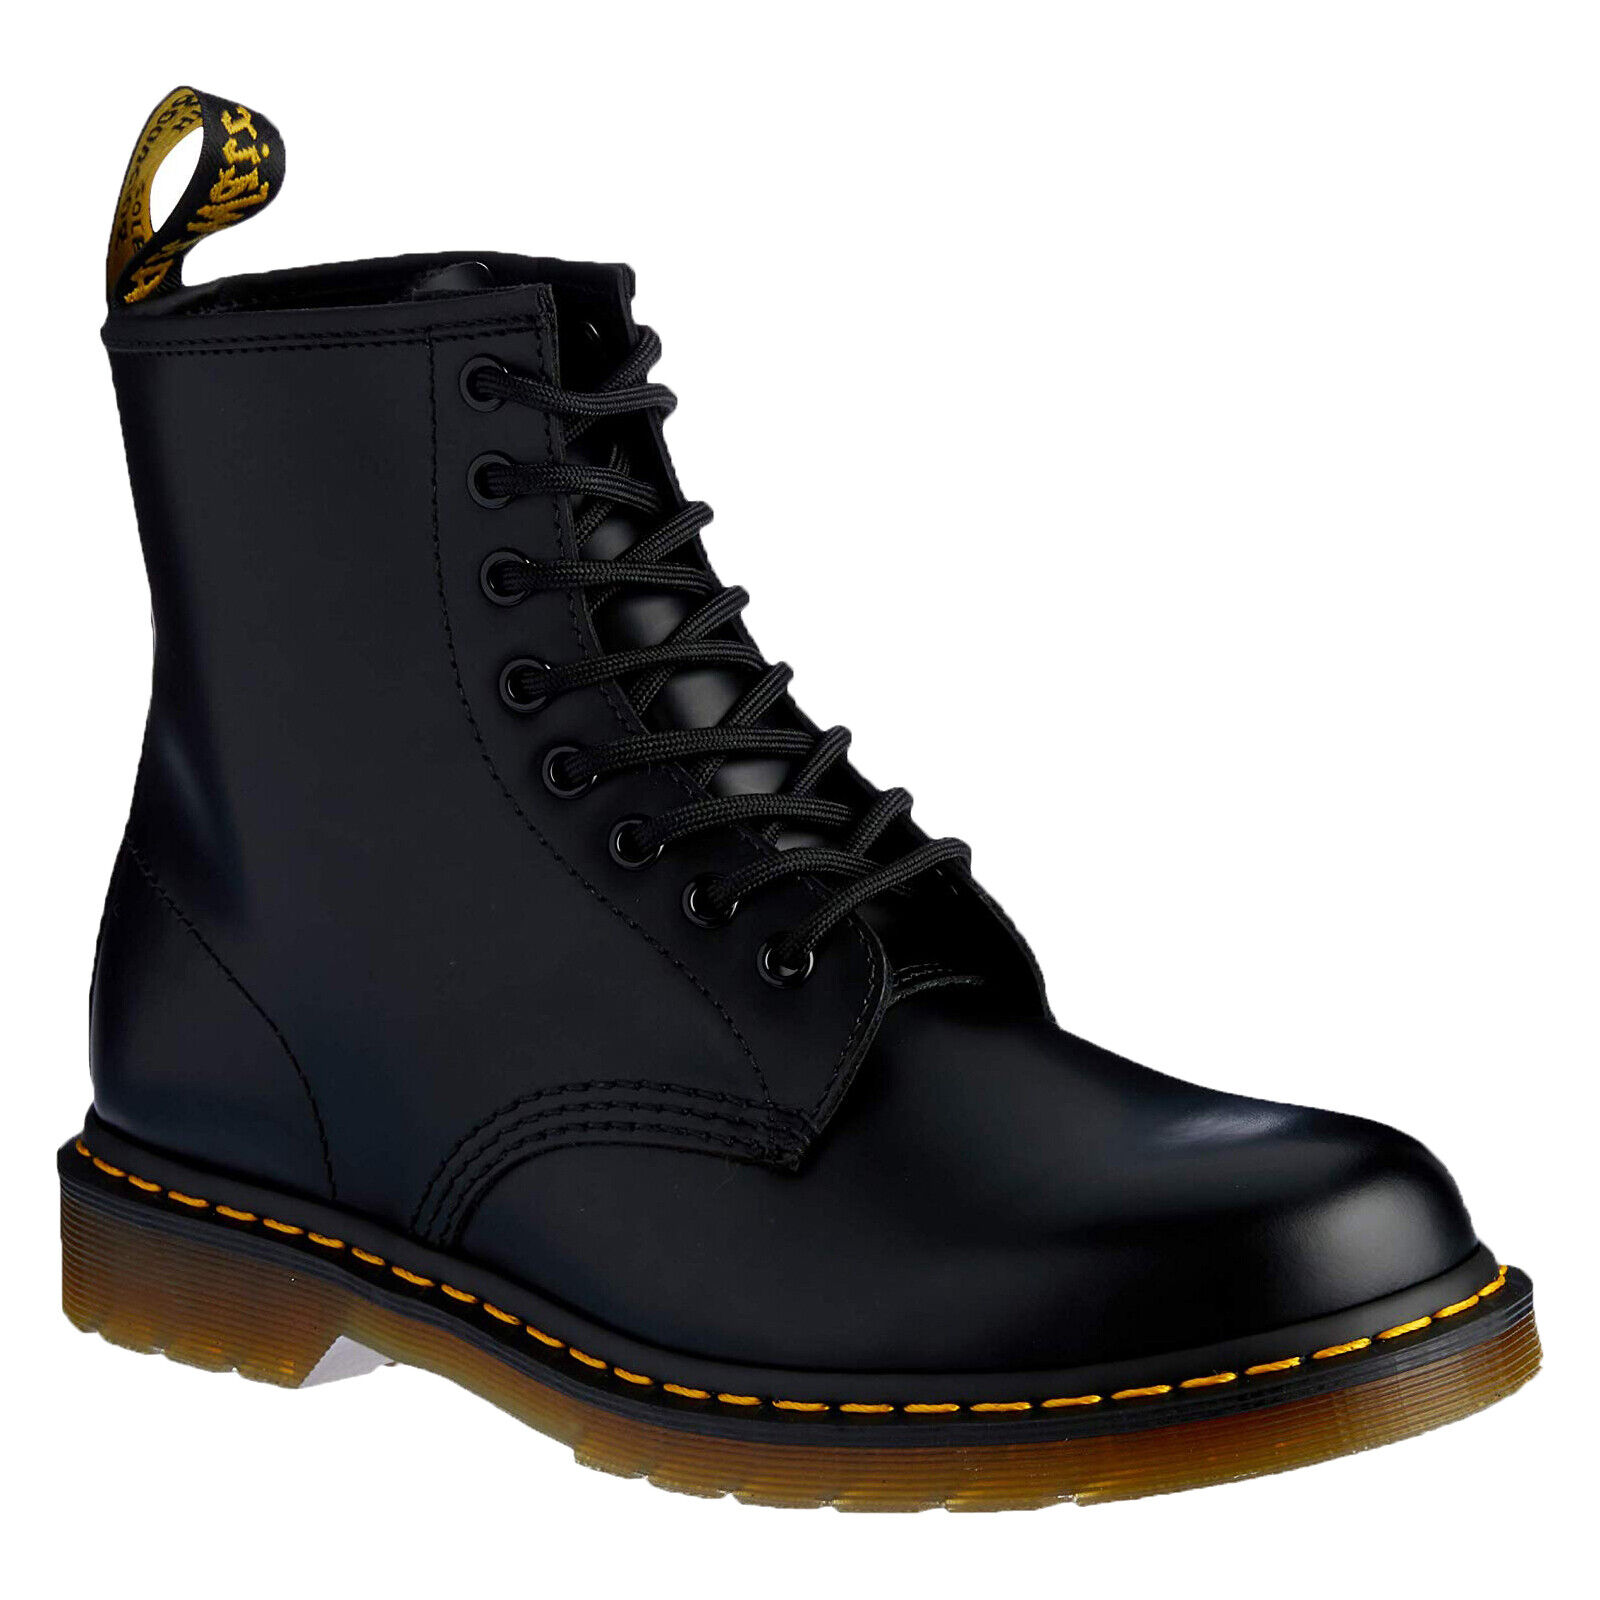 Dr. Martens 1460 Originals 8 Eye Lace up Boot Black Smooth Leather 